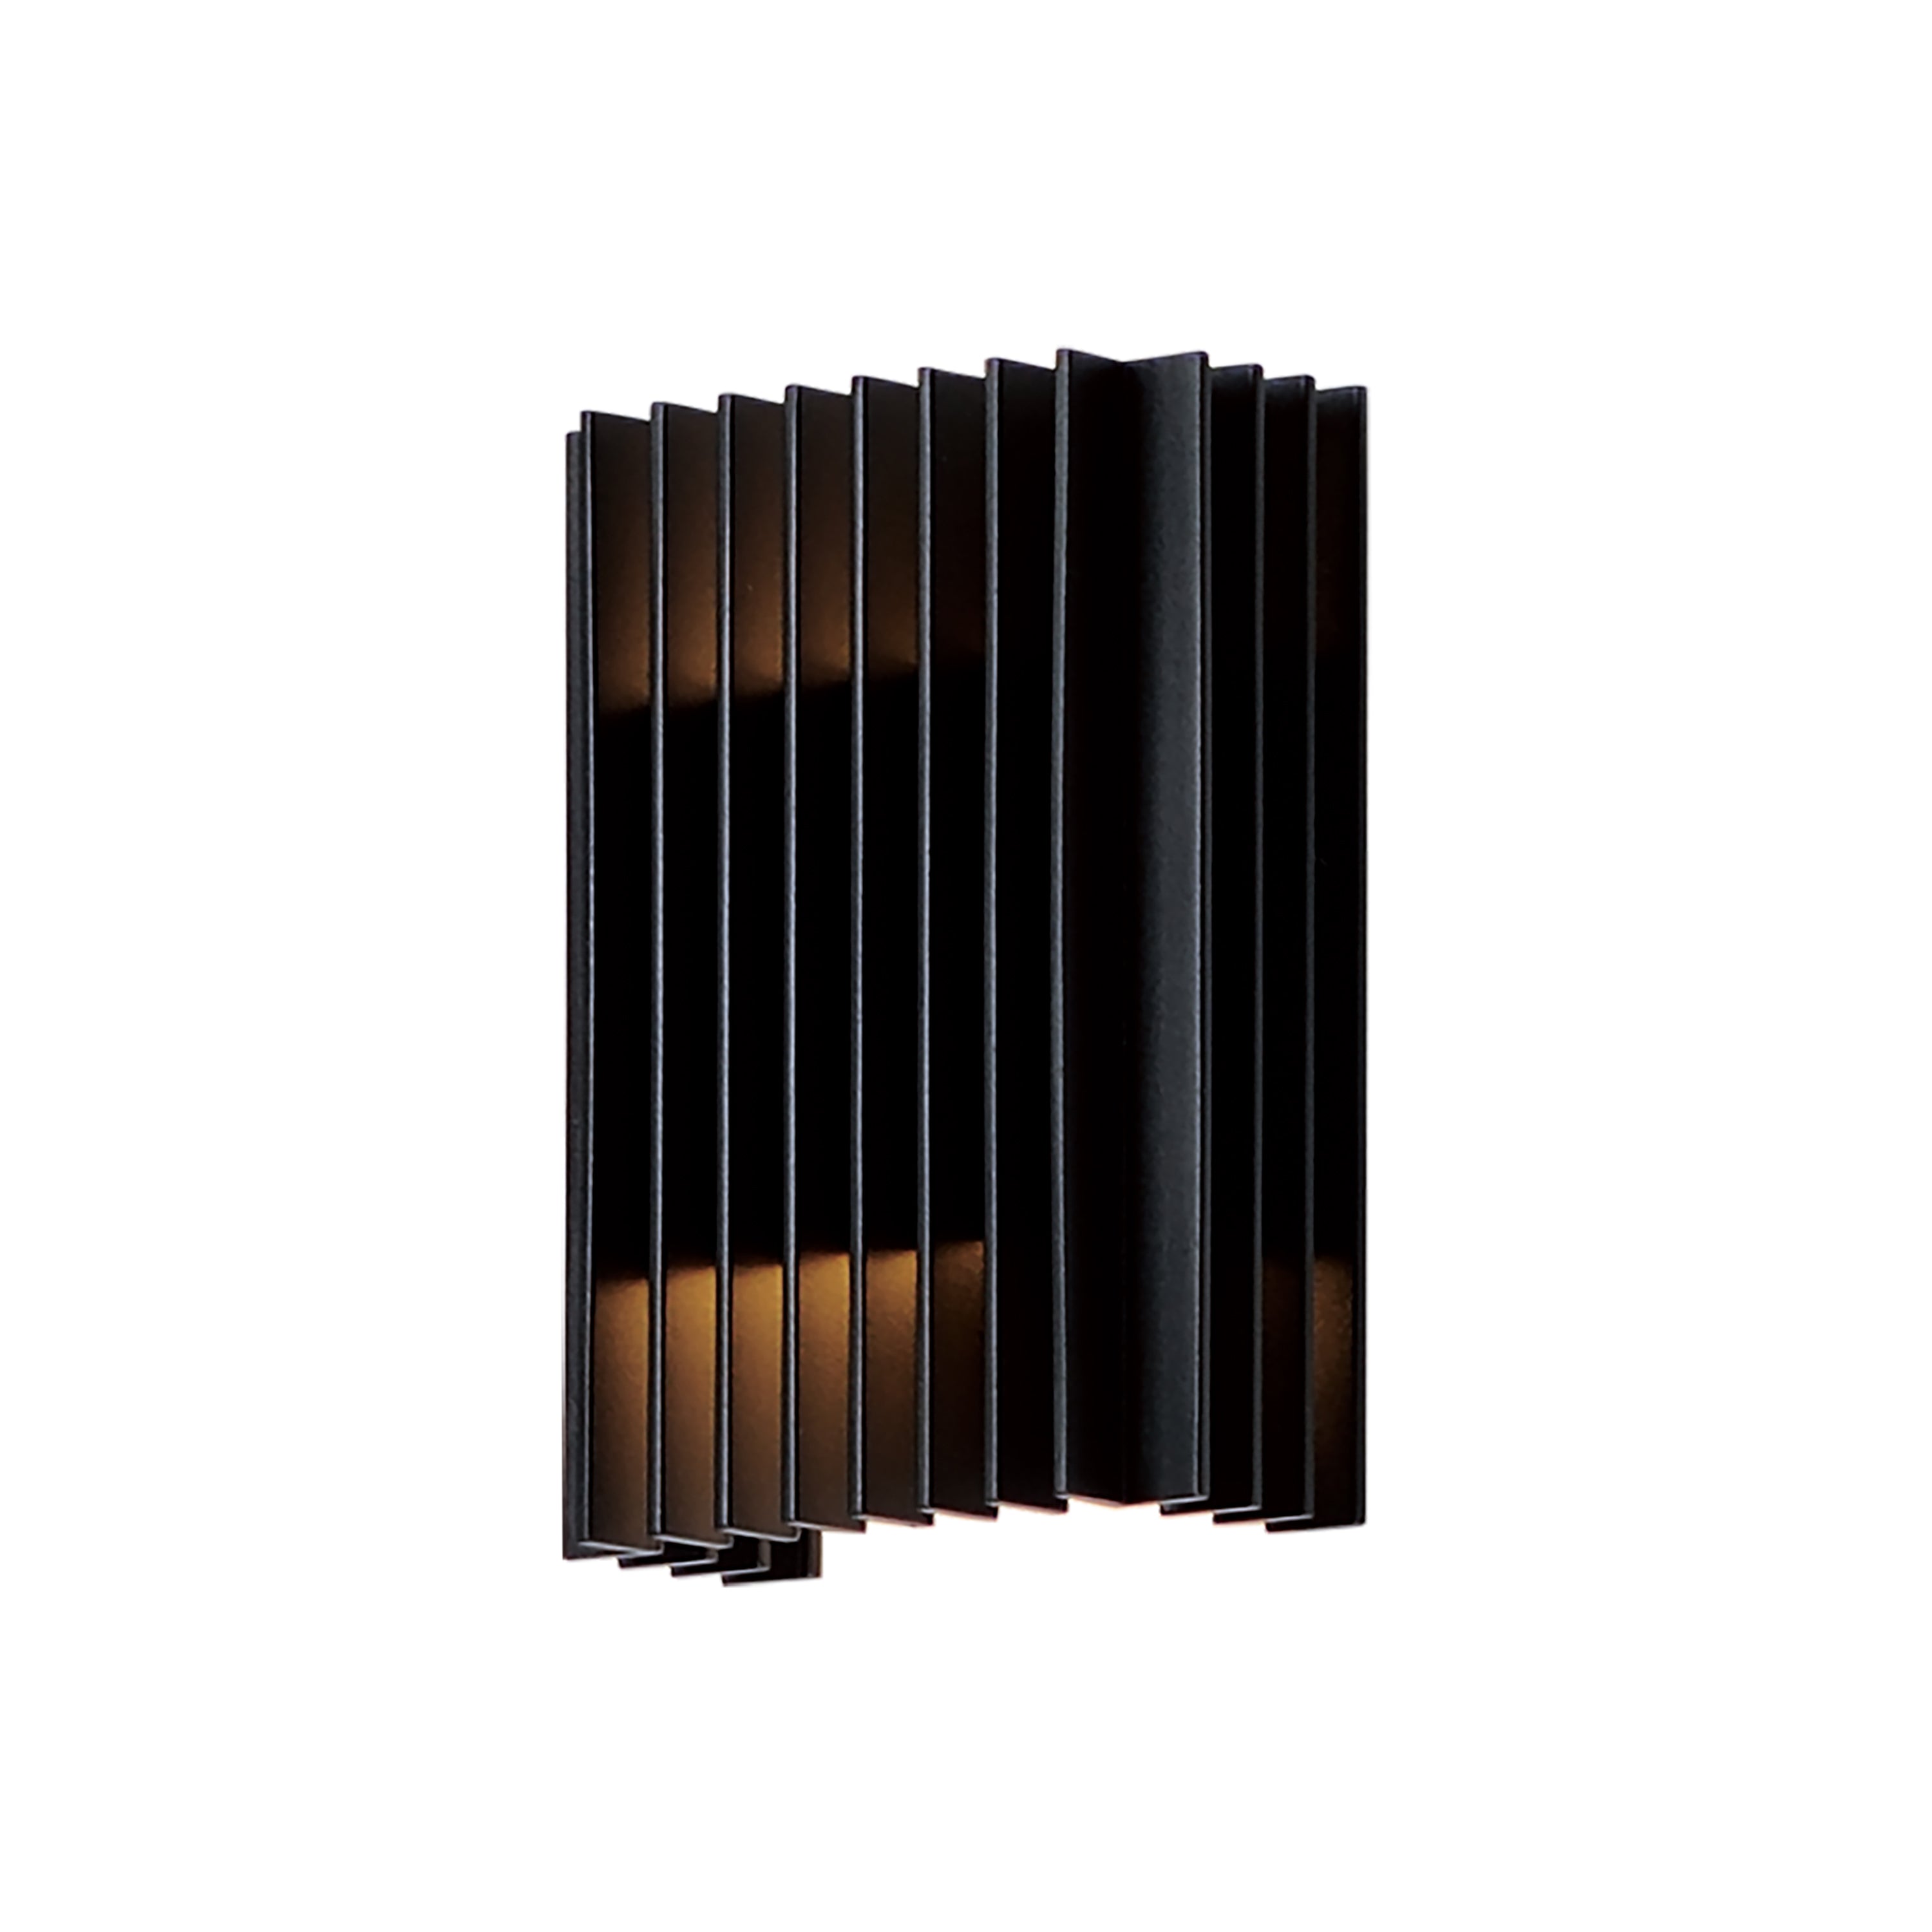 RAMPART Outdoor wall sconce Black INTEGRATED LED - E30112-BK | MAXIM/ET3